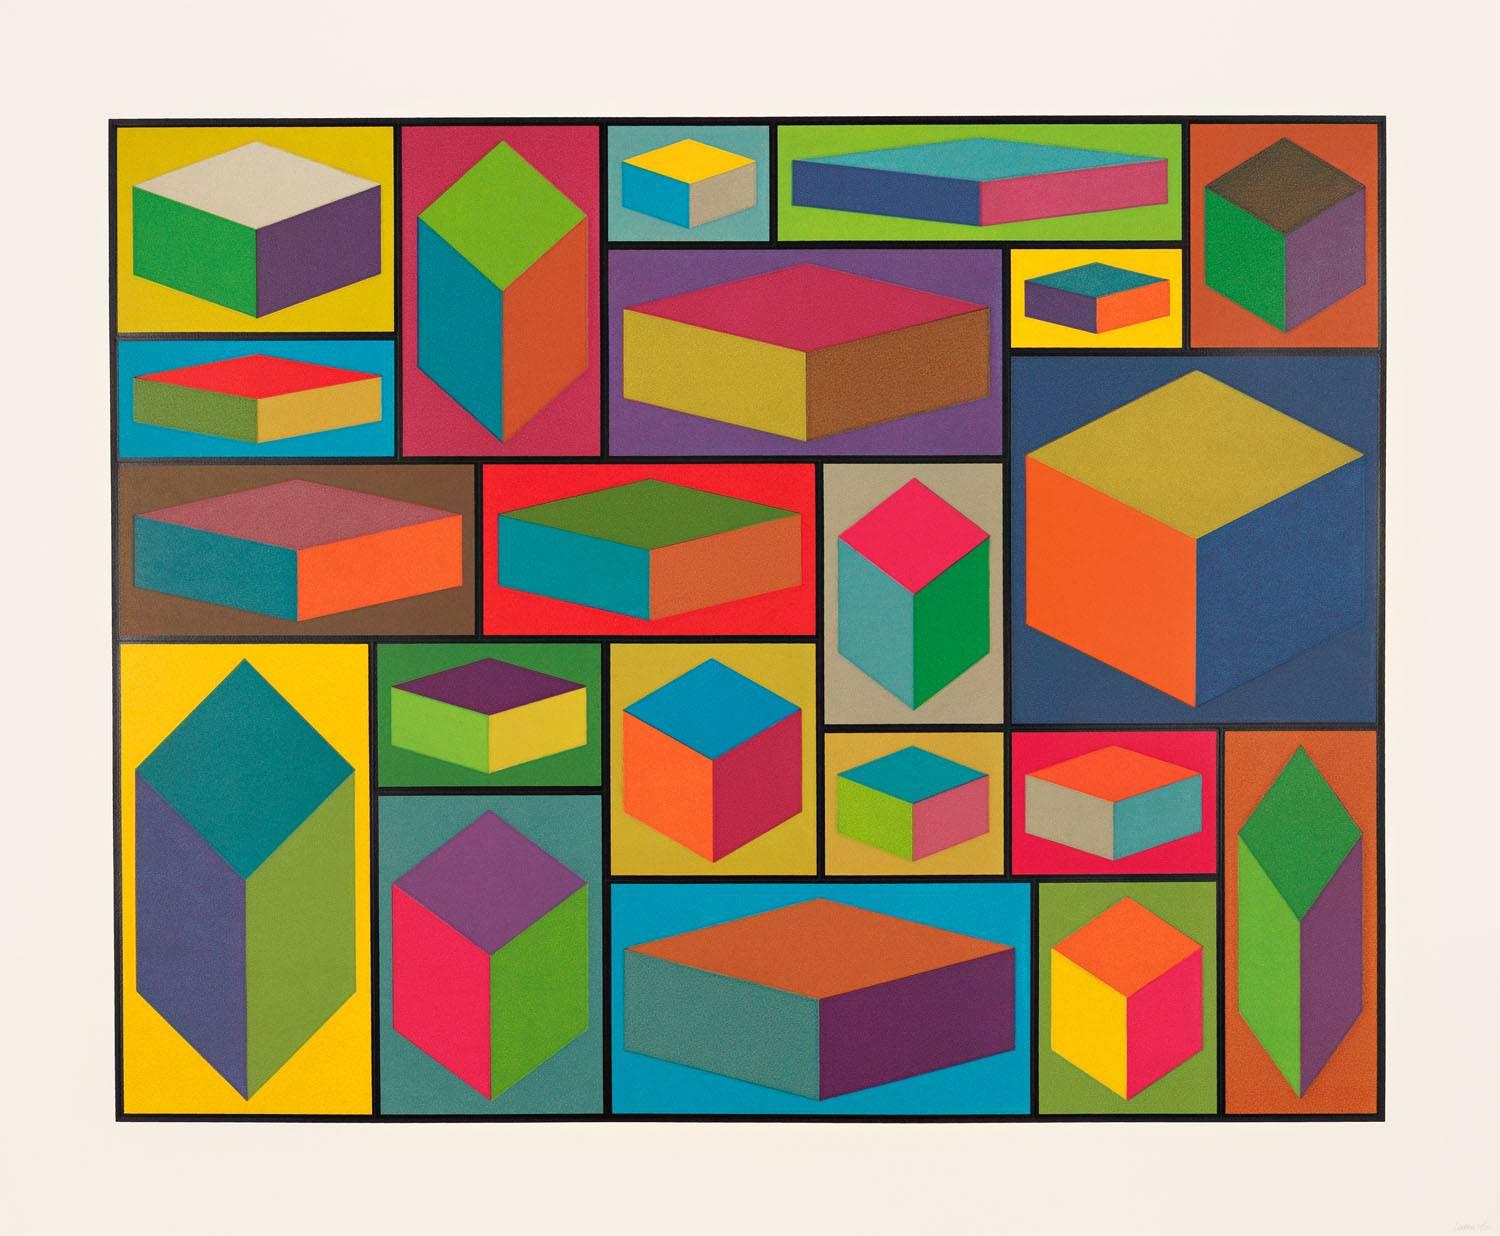 Distorted Cubes (B) - Print by Sol LeWitt